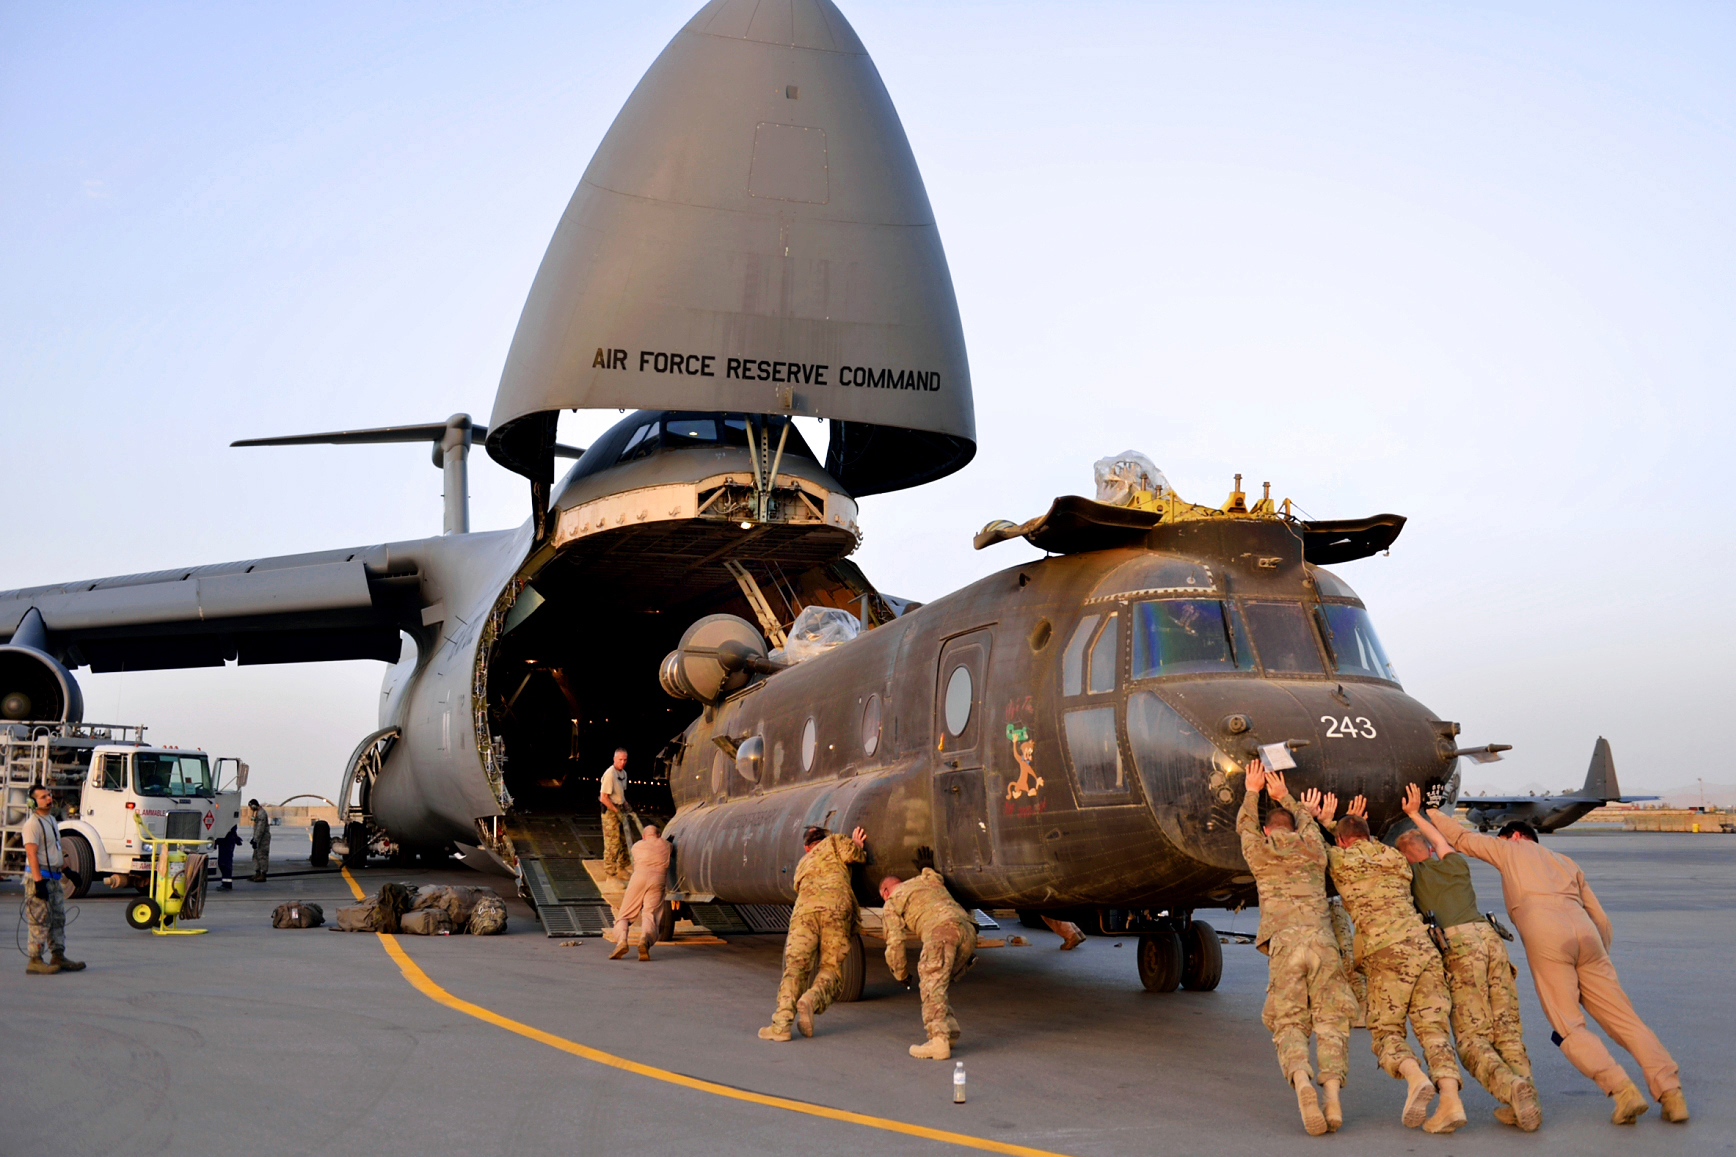 U.S._Army_National_Guard_soldiers_push_a_CH-47_Chinook_helicopter_into_a_U.S._Air_Force_C-5_Galaxy_as_they_prepare_to_return_home_to_the_United_States_following_a_nine-month_deployment_to_Afghanistan_on_April_20_130420-Z-ZZ999-004.jpg